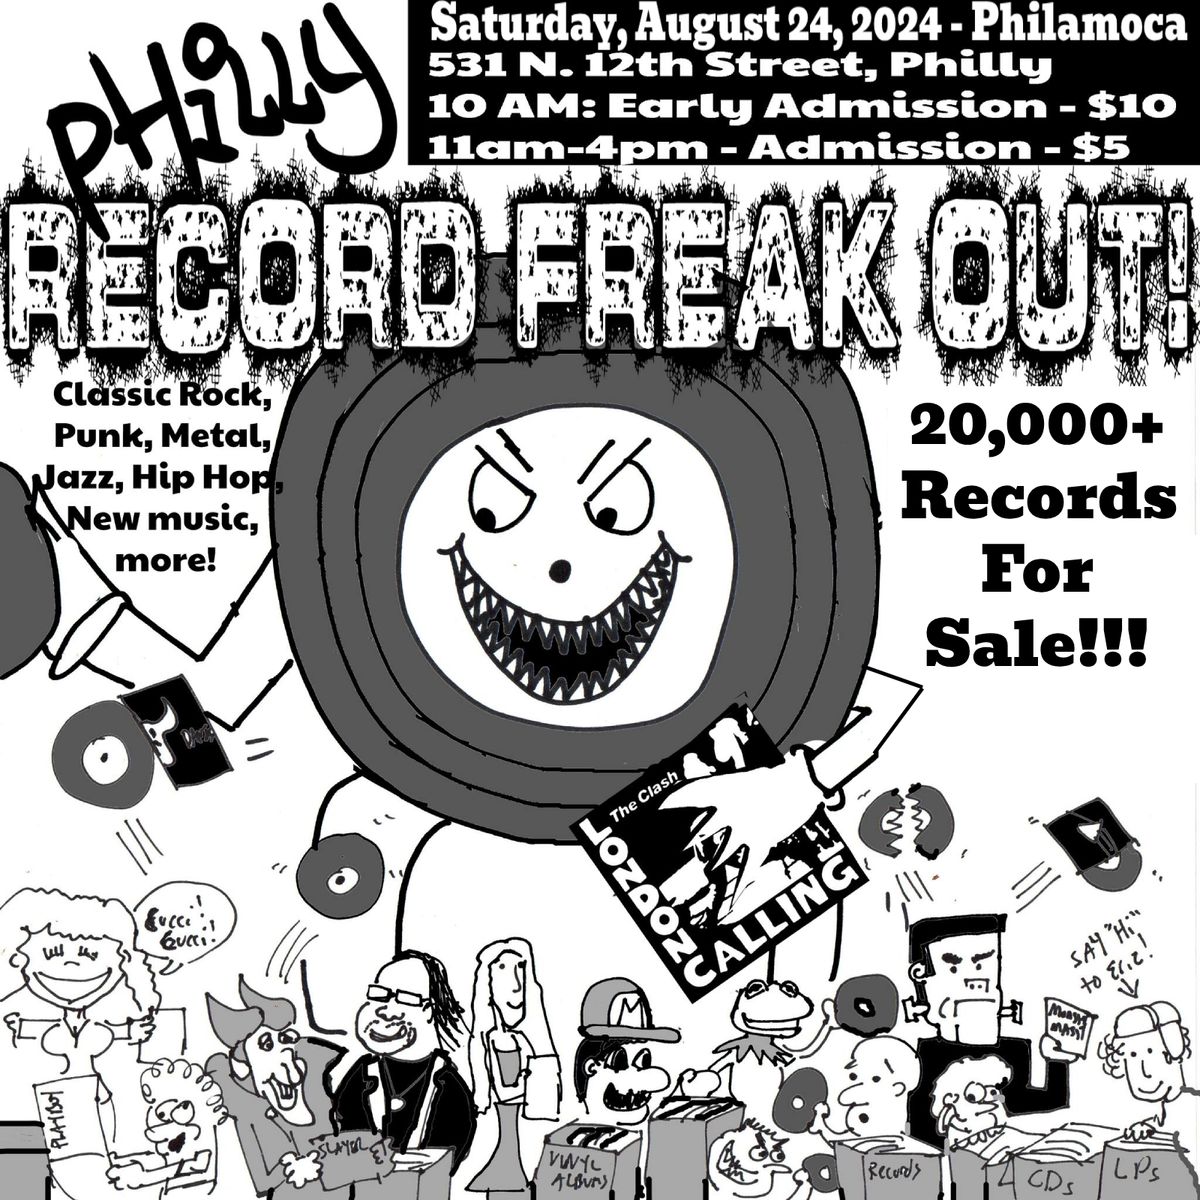 The Philly Record Freak Out at Philamoca!!! Sat, August 24!